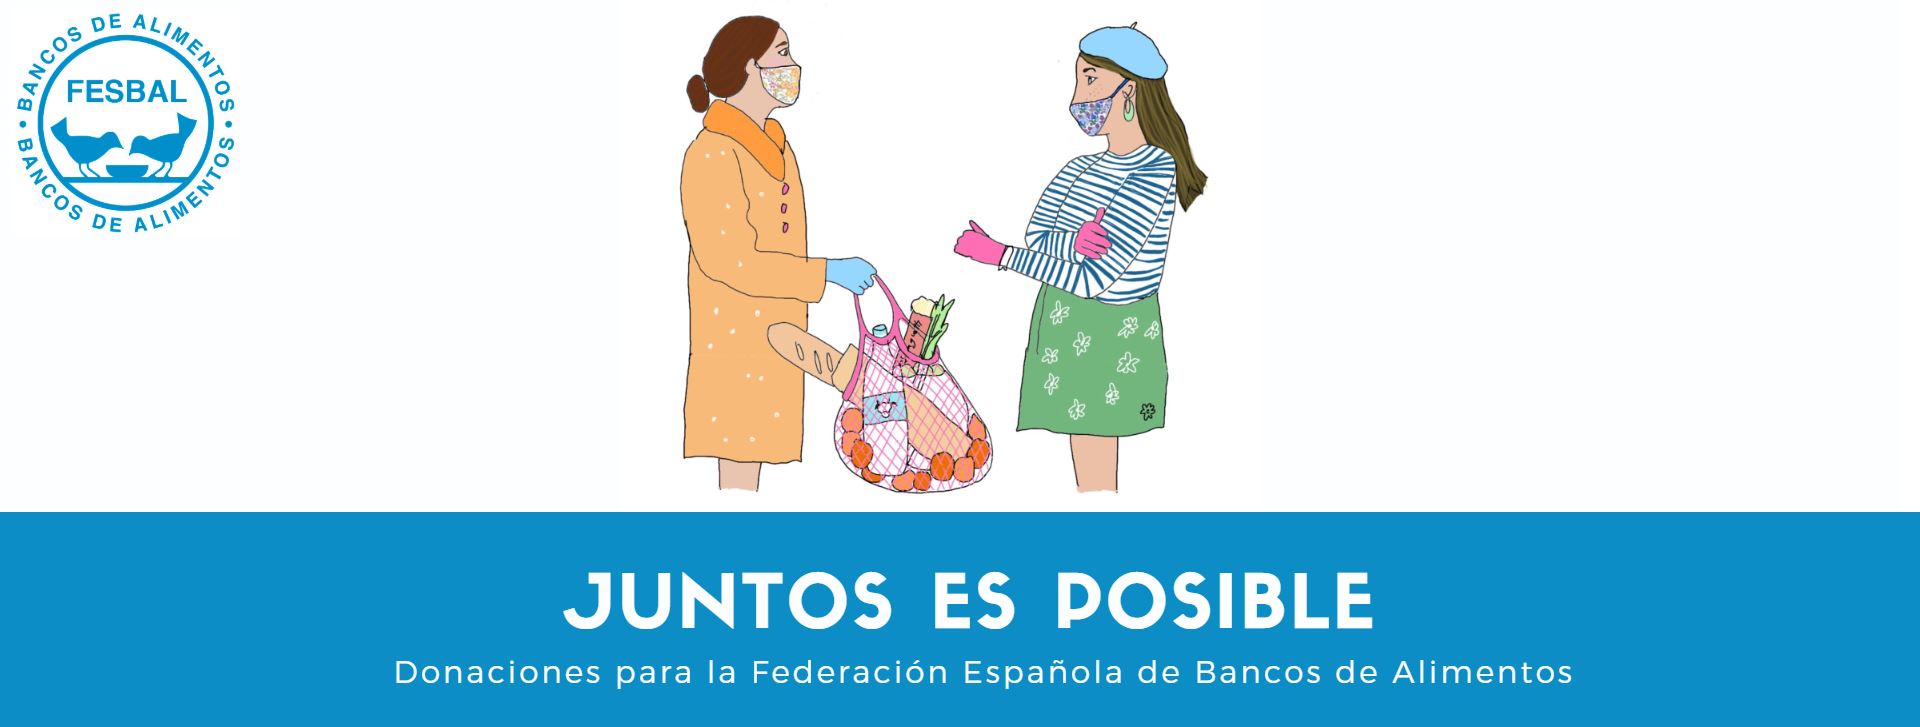 SegurCaixa Adeslas contributes funds for 62,500 food rations from the Food Bank